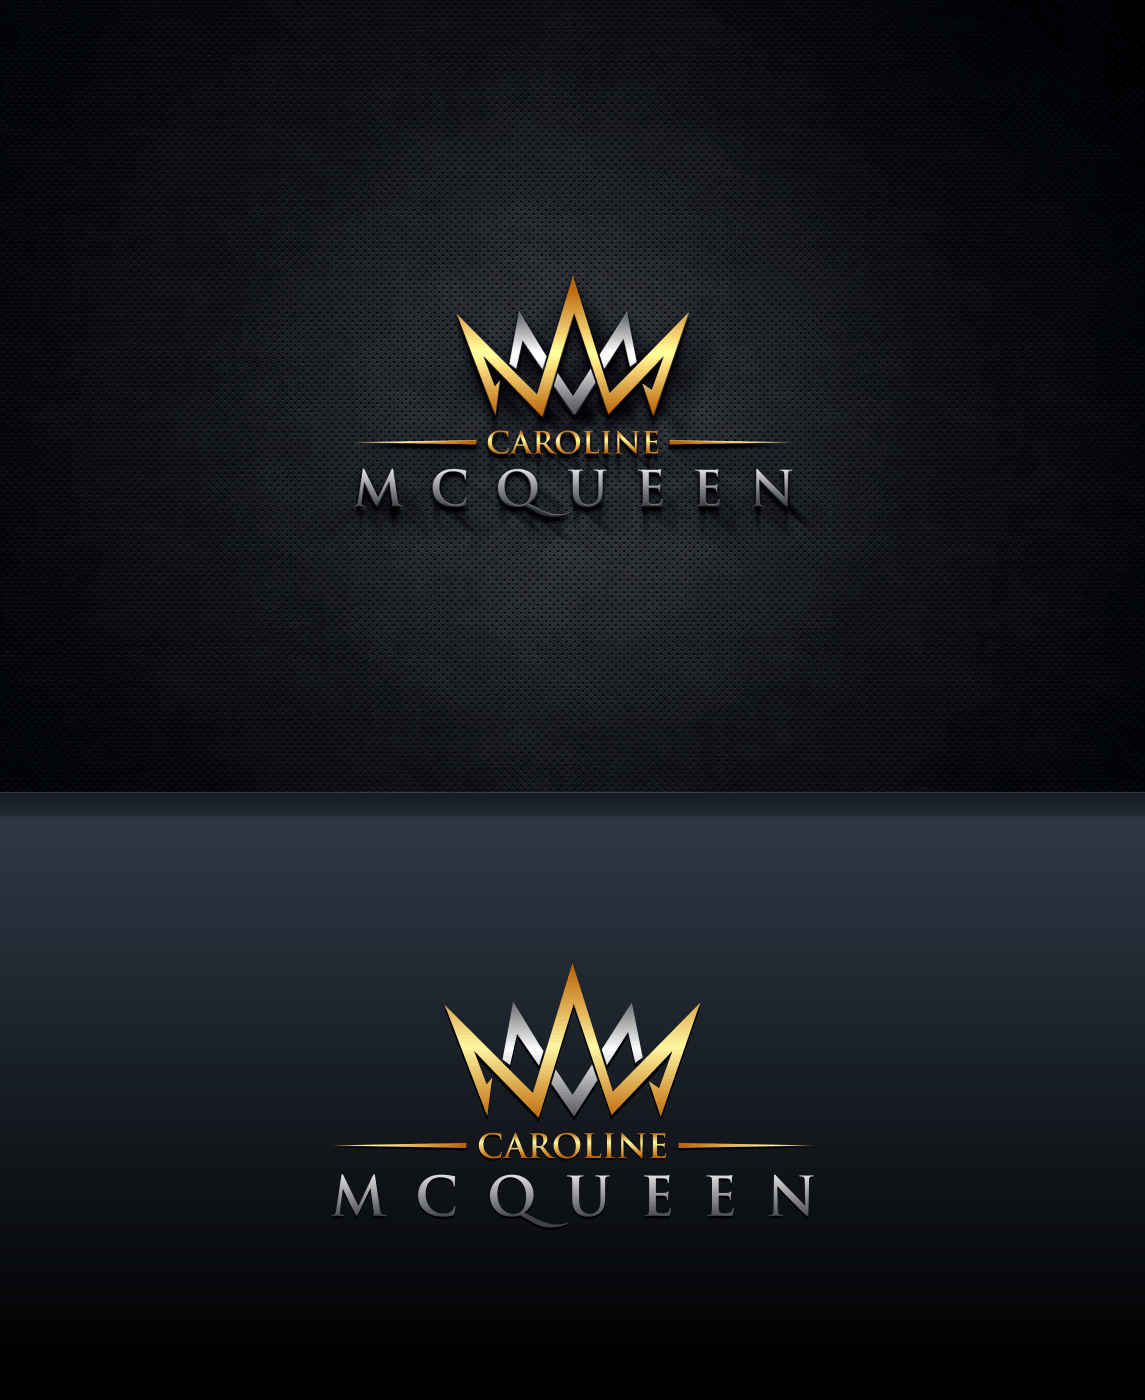 Silver and Gold Logo - Crown Logos Ideas For Building A Successful Brand